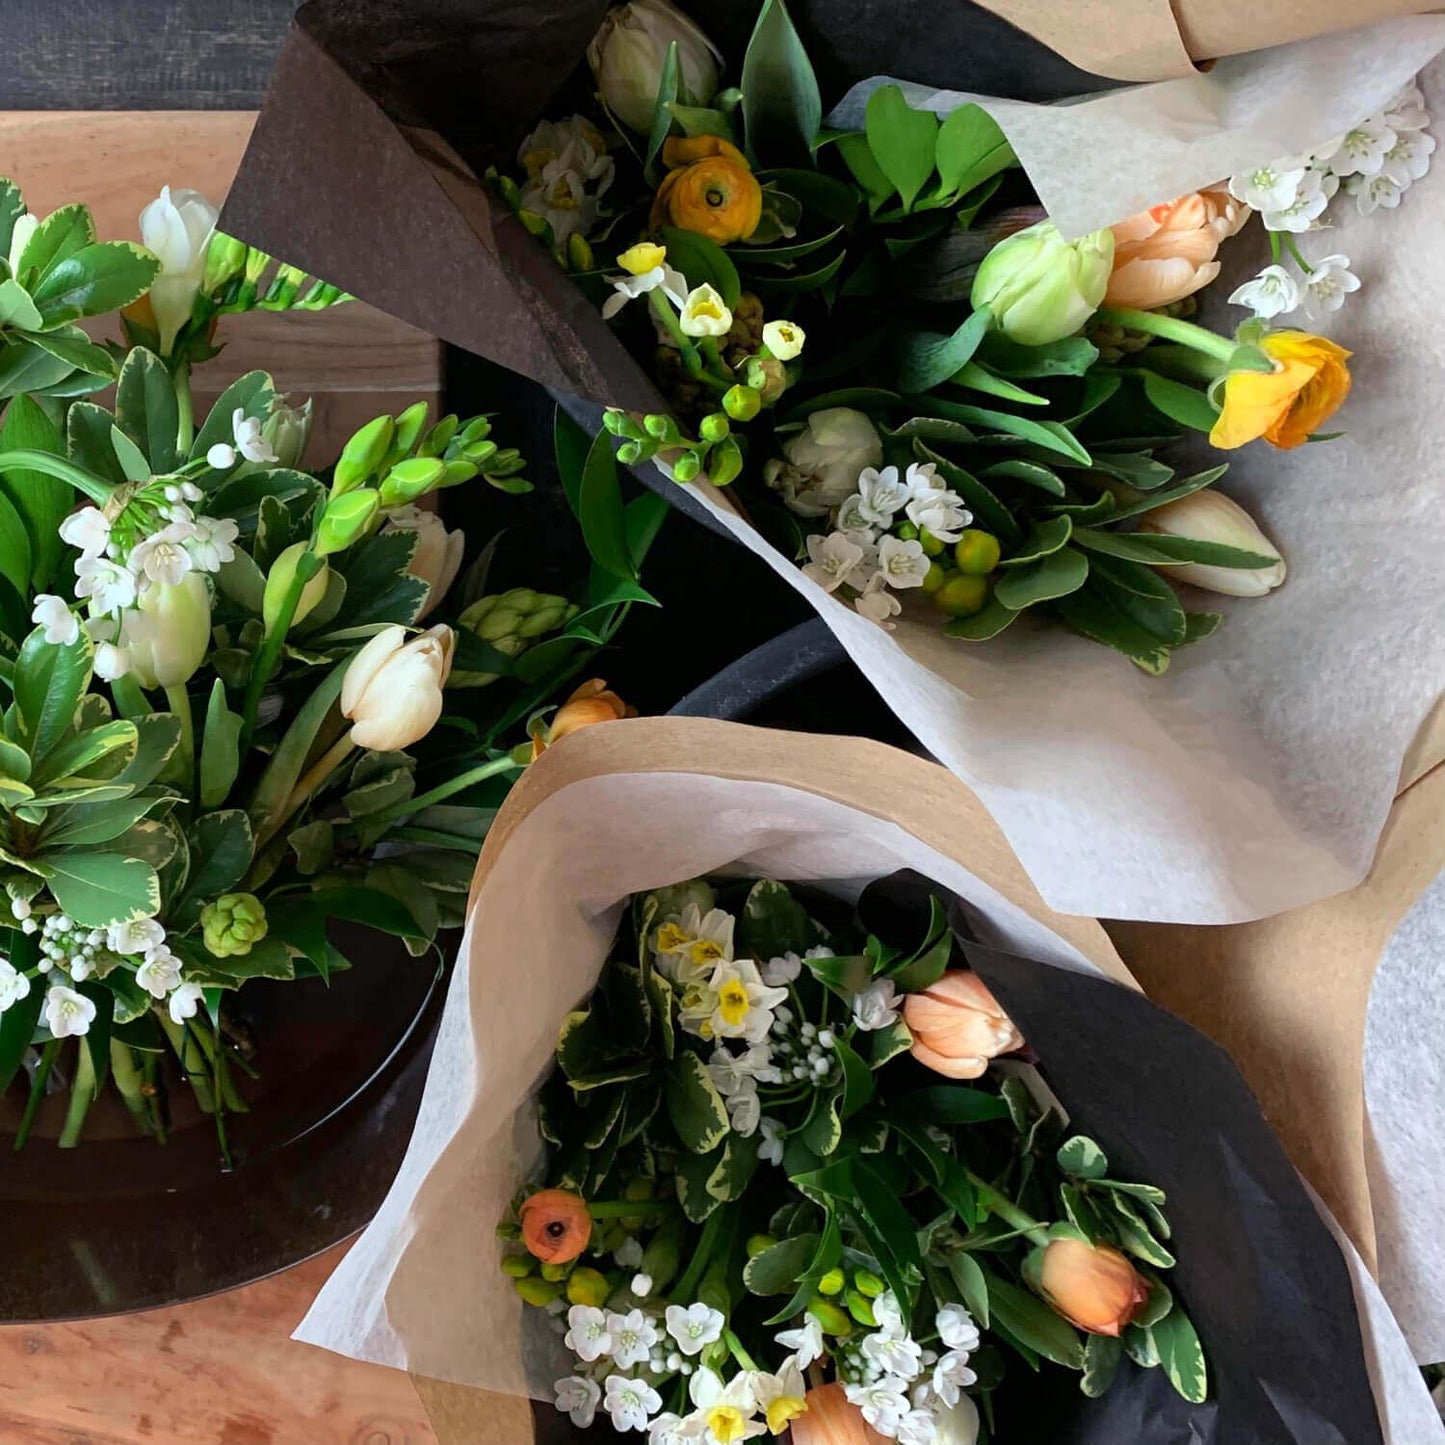 Wonderblooms monthly flower subscription from Quince Flowers, Toronto Florist and flower delivery - bouquets shot from above with tulips, yellows and light pinks. Order online for flower & plant subscriptions from the best florist in Toronto near you.